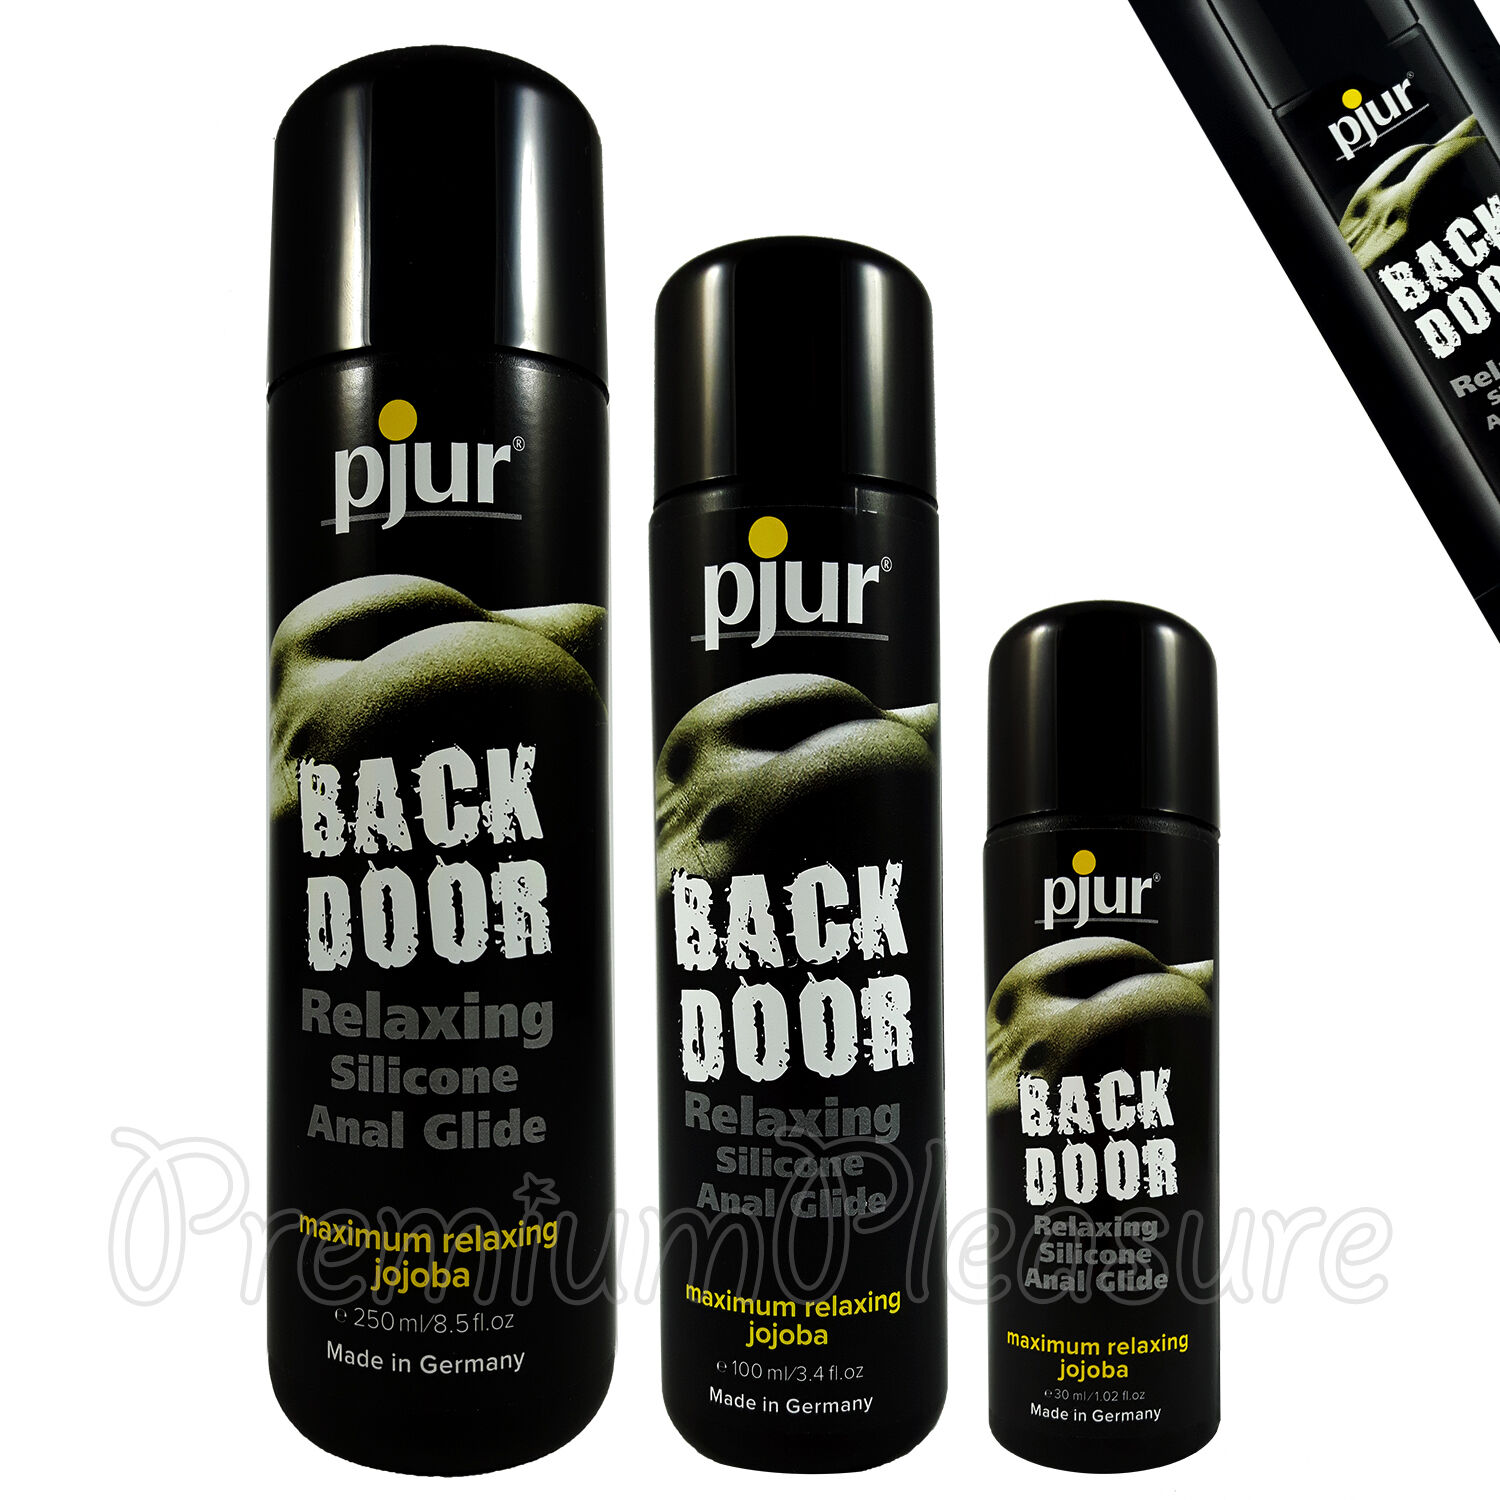 Pjur Back Door Relaxing Lubricant*silicone Based Anal Glide Lube* Jojoba Extract